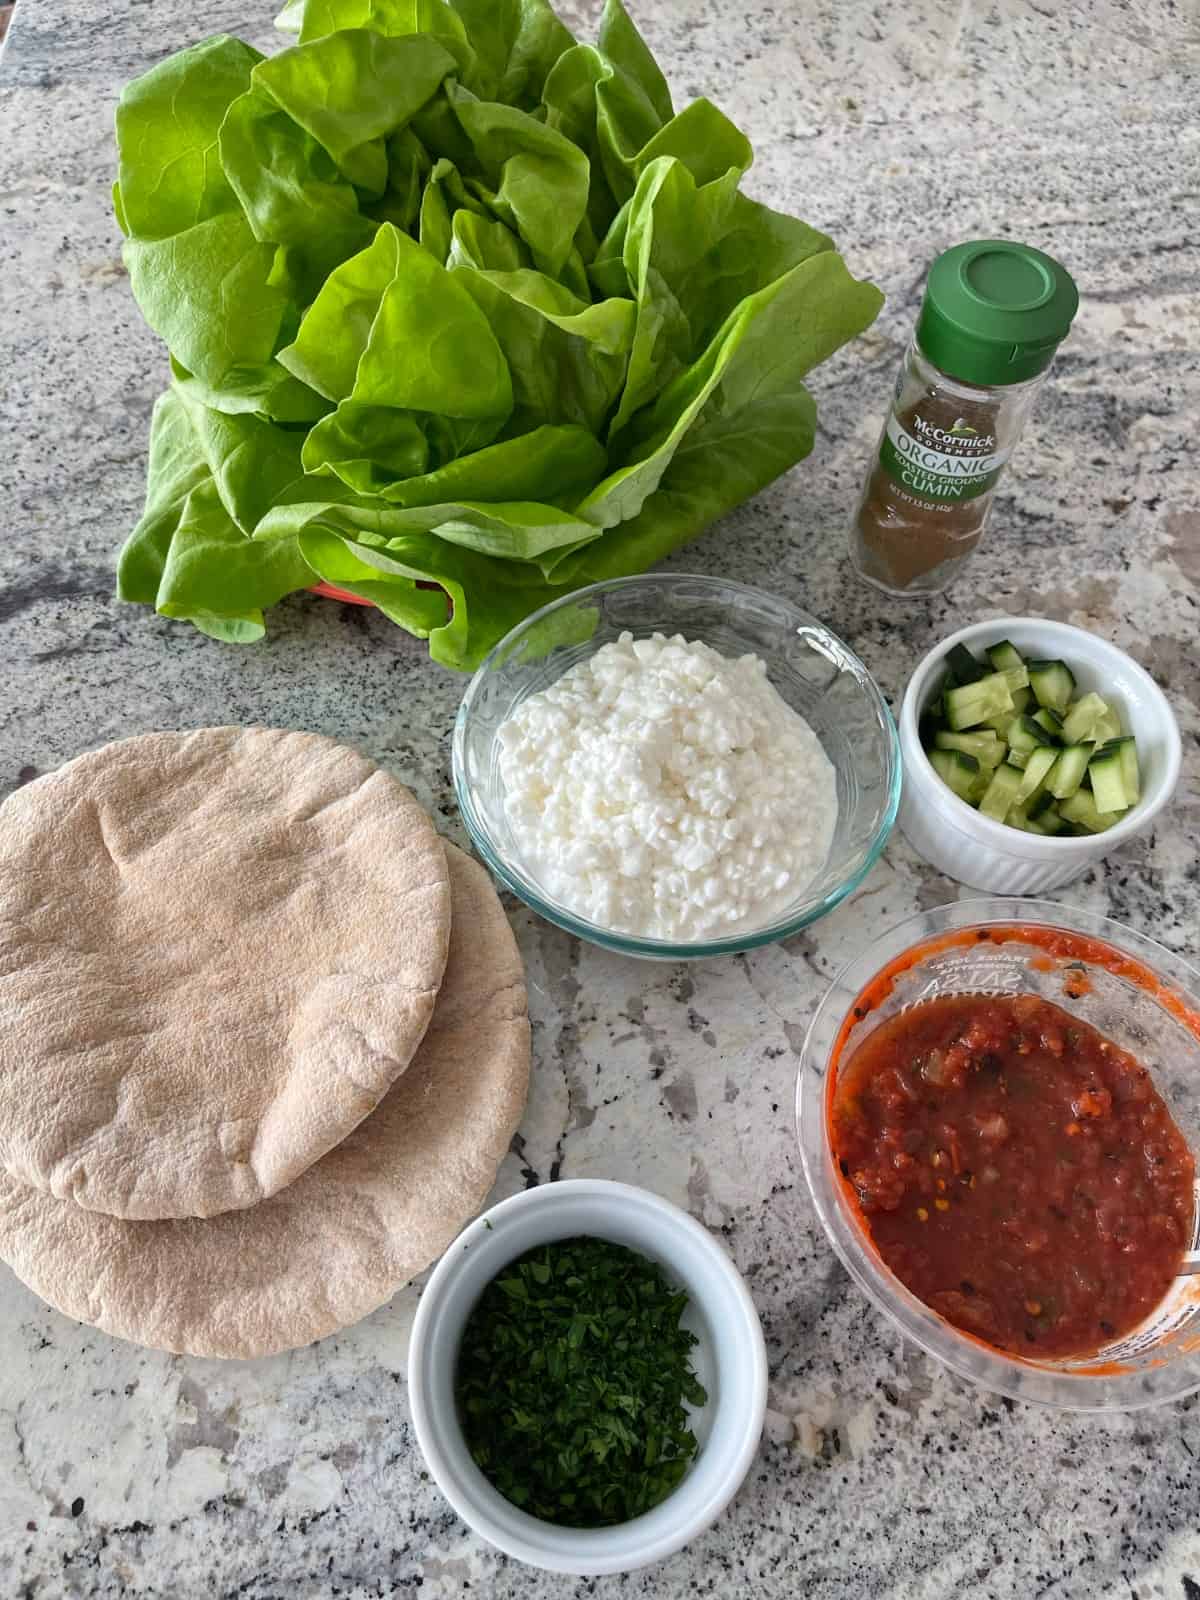 Bibb lettuce, cottage cheese, salsa, chopped cilantro leaves, two whole wheat pita breads, diced cucumber and ground cumin on granite counter.